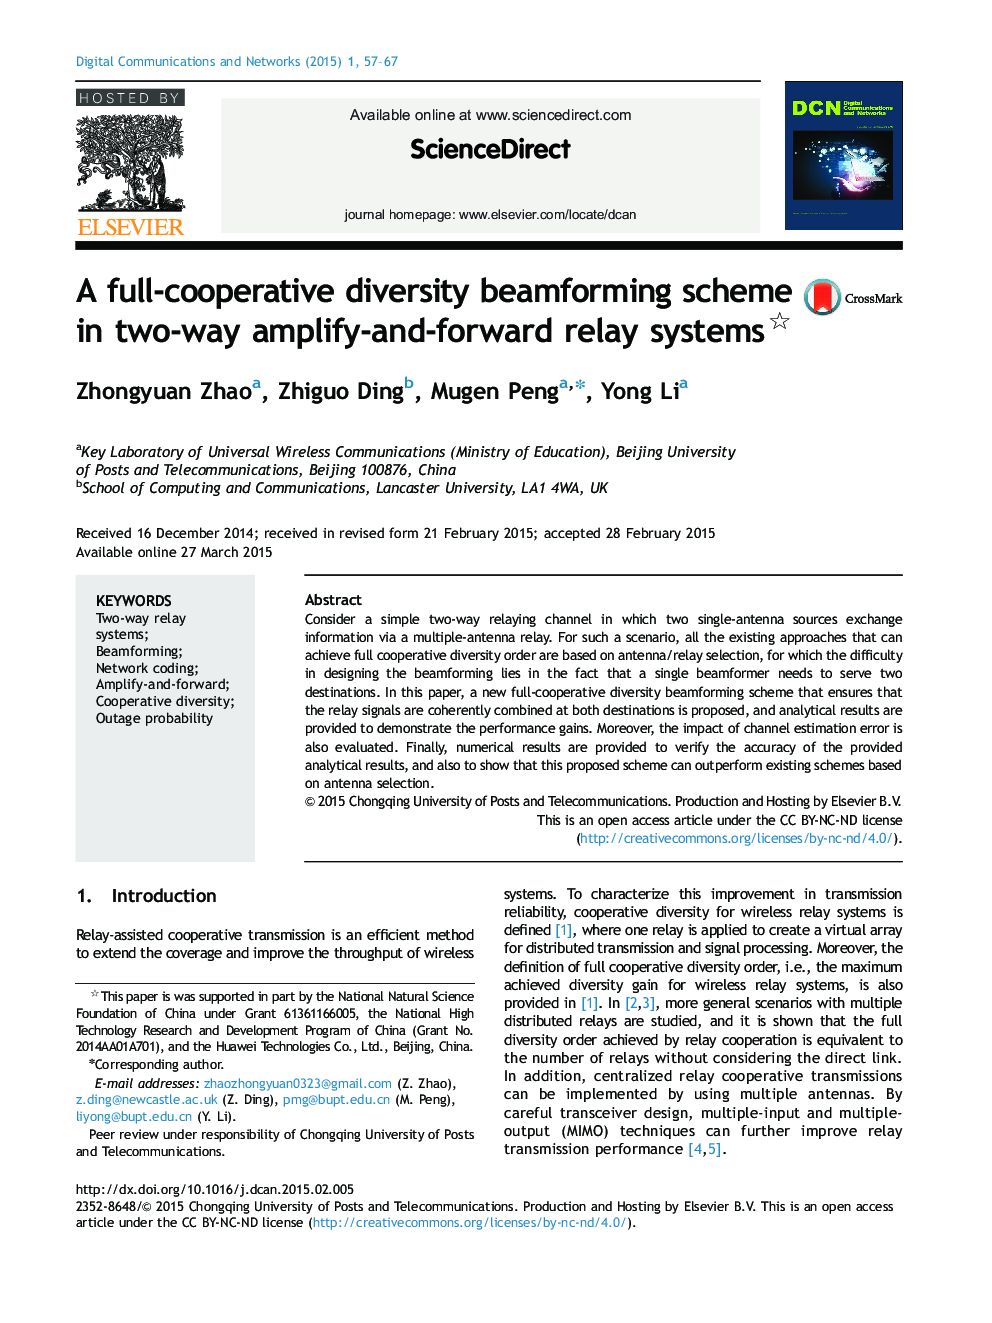 A full-cooperative diversity beamformingscheme in two-way amplify-and-forward relay systems 